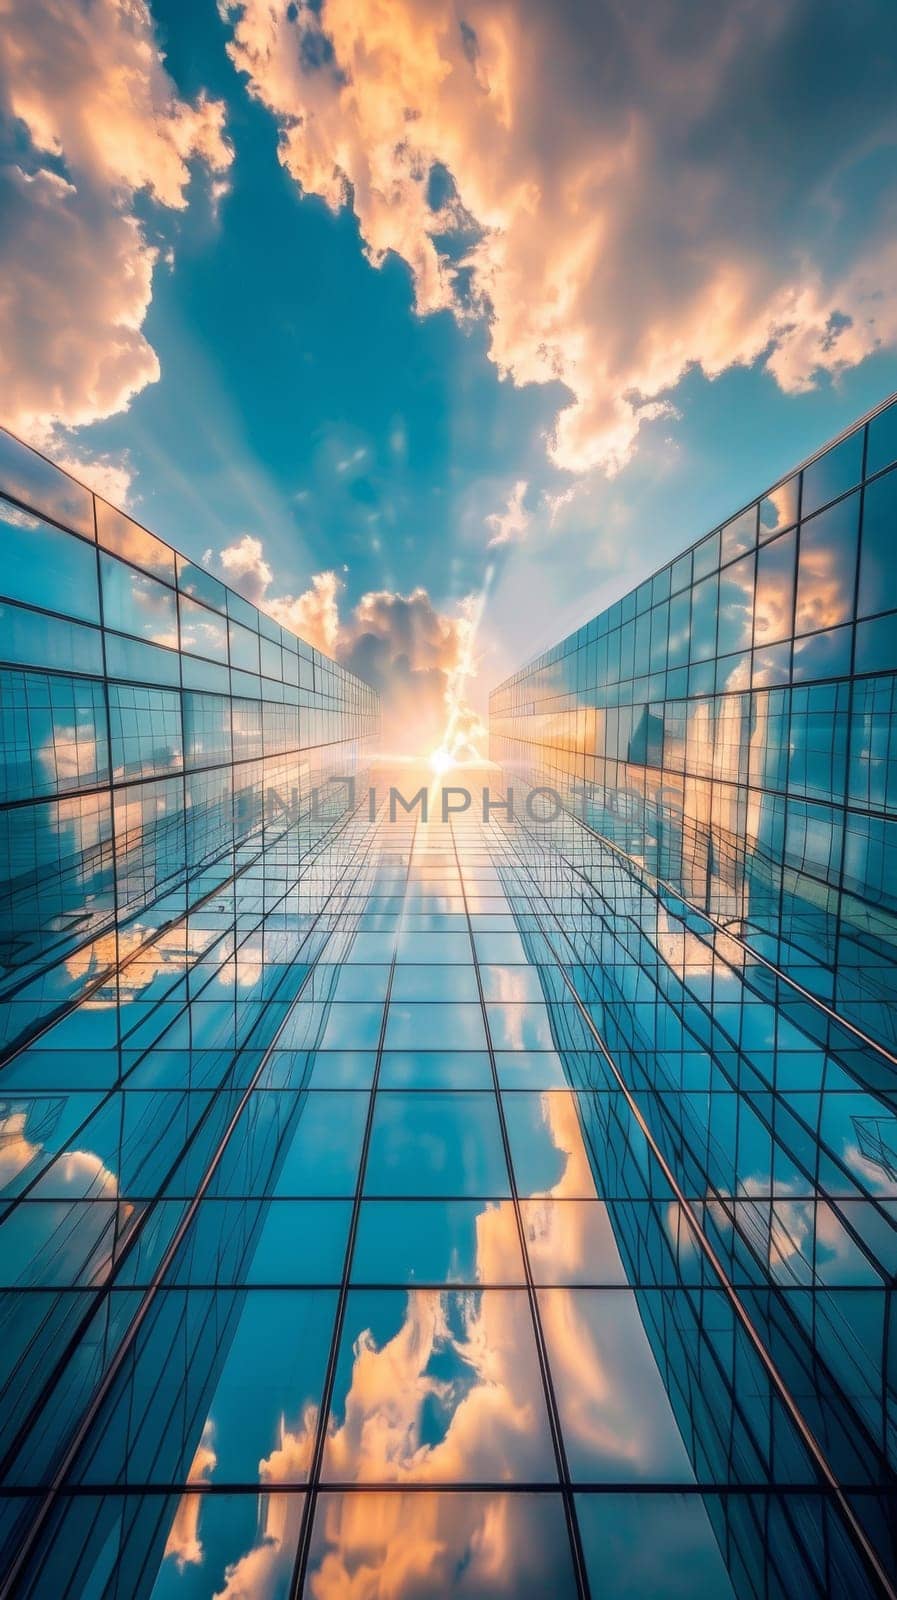 A view of a building with clouds and sky in the background